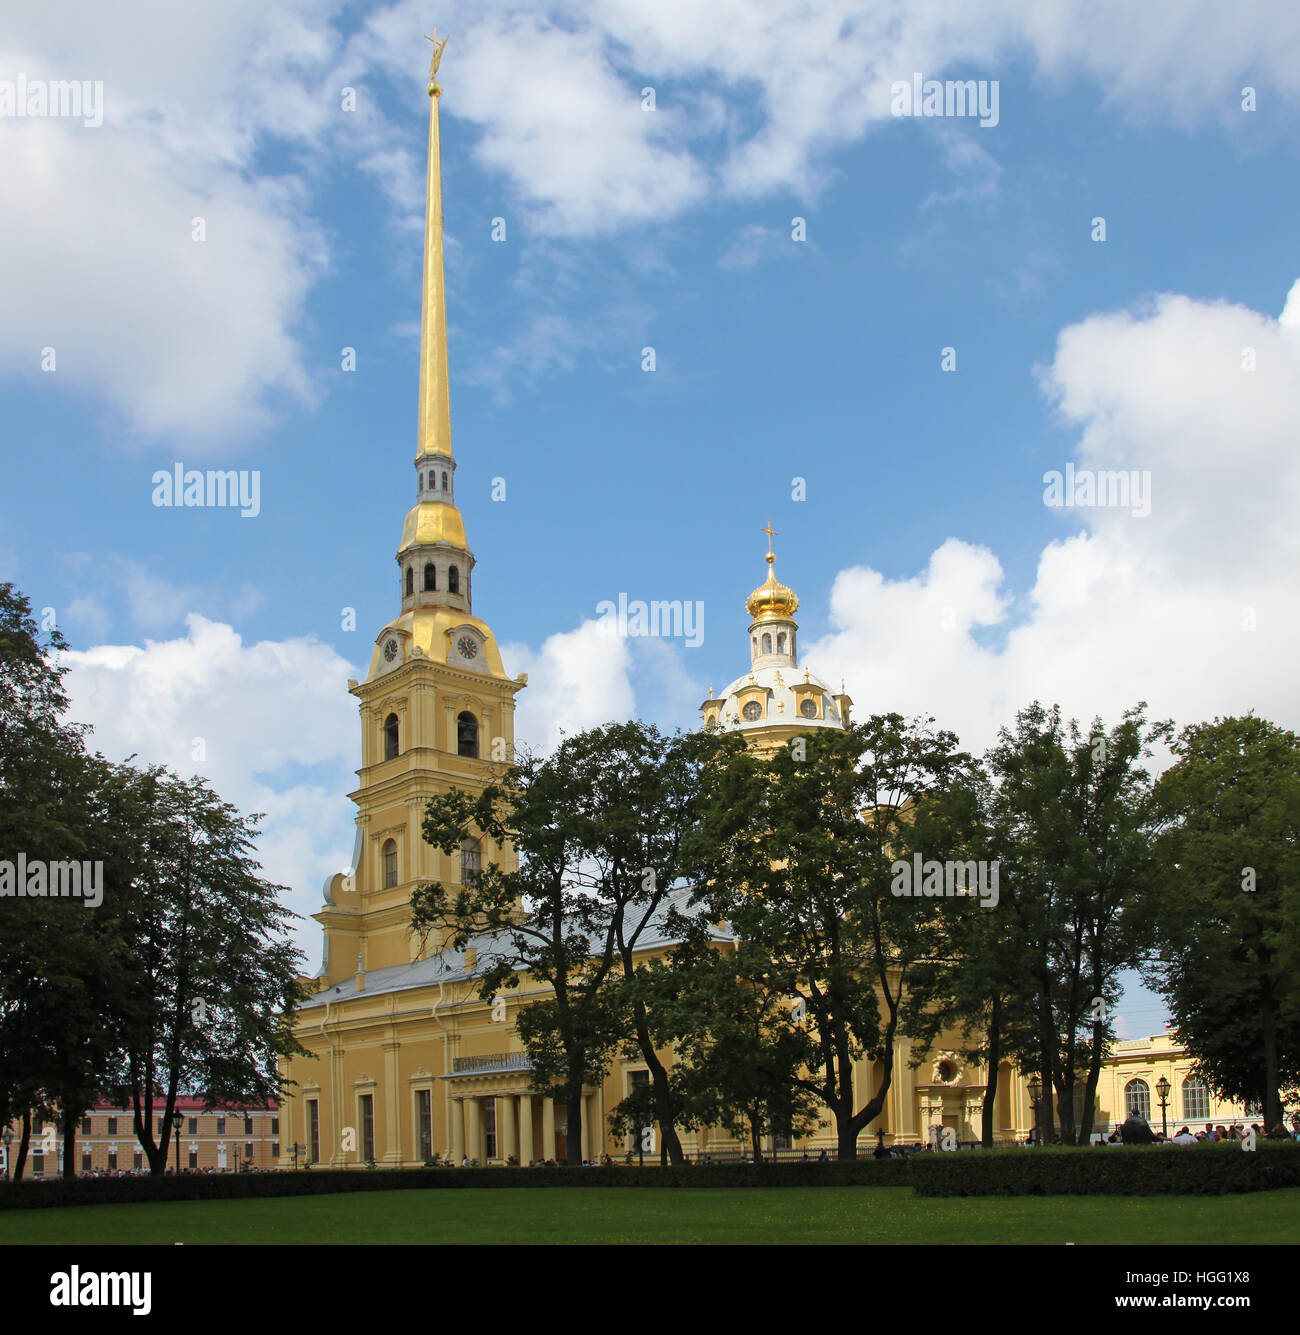 Saints Peter and Paul Cathedral, Saint Petersburg, Russia Stock Photo